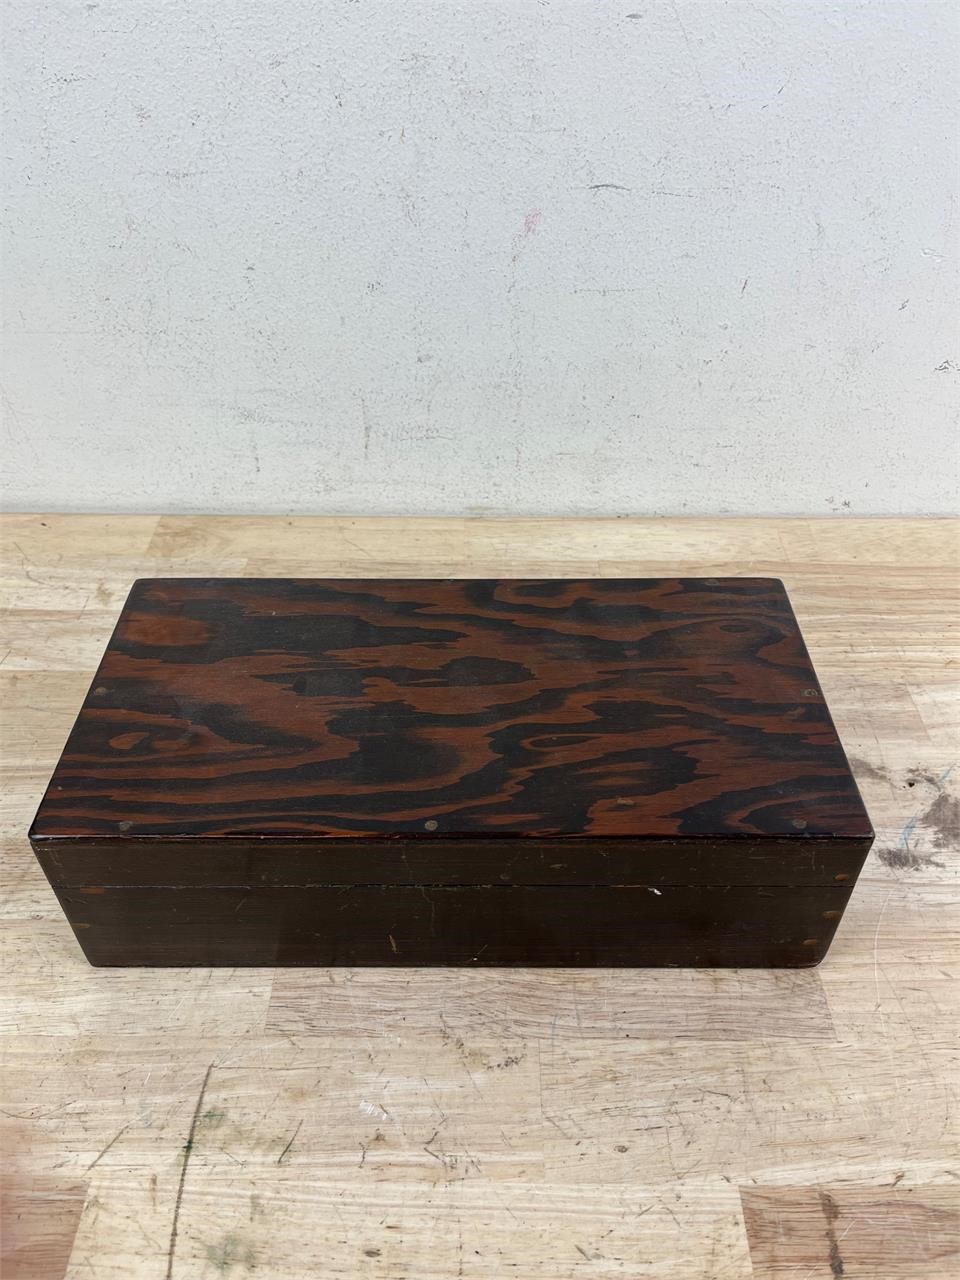 Wooden Jewelry Box with Vintage Jewelry